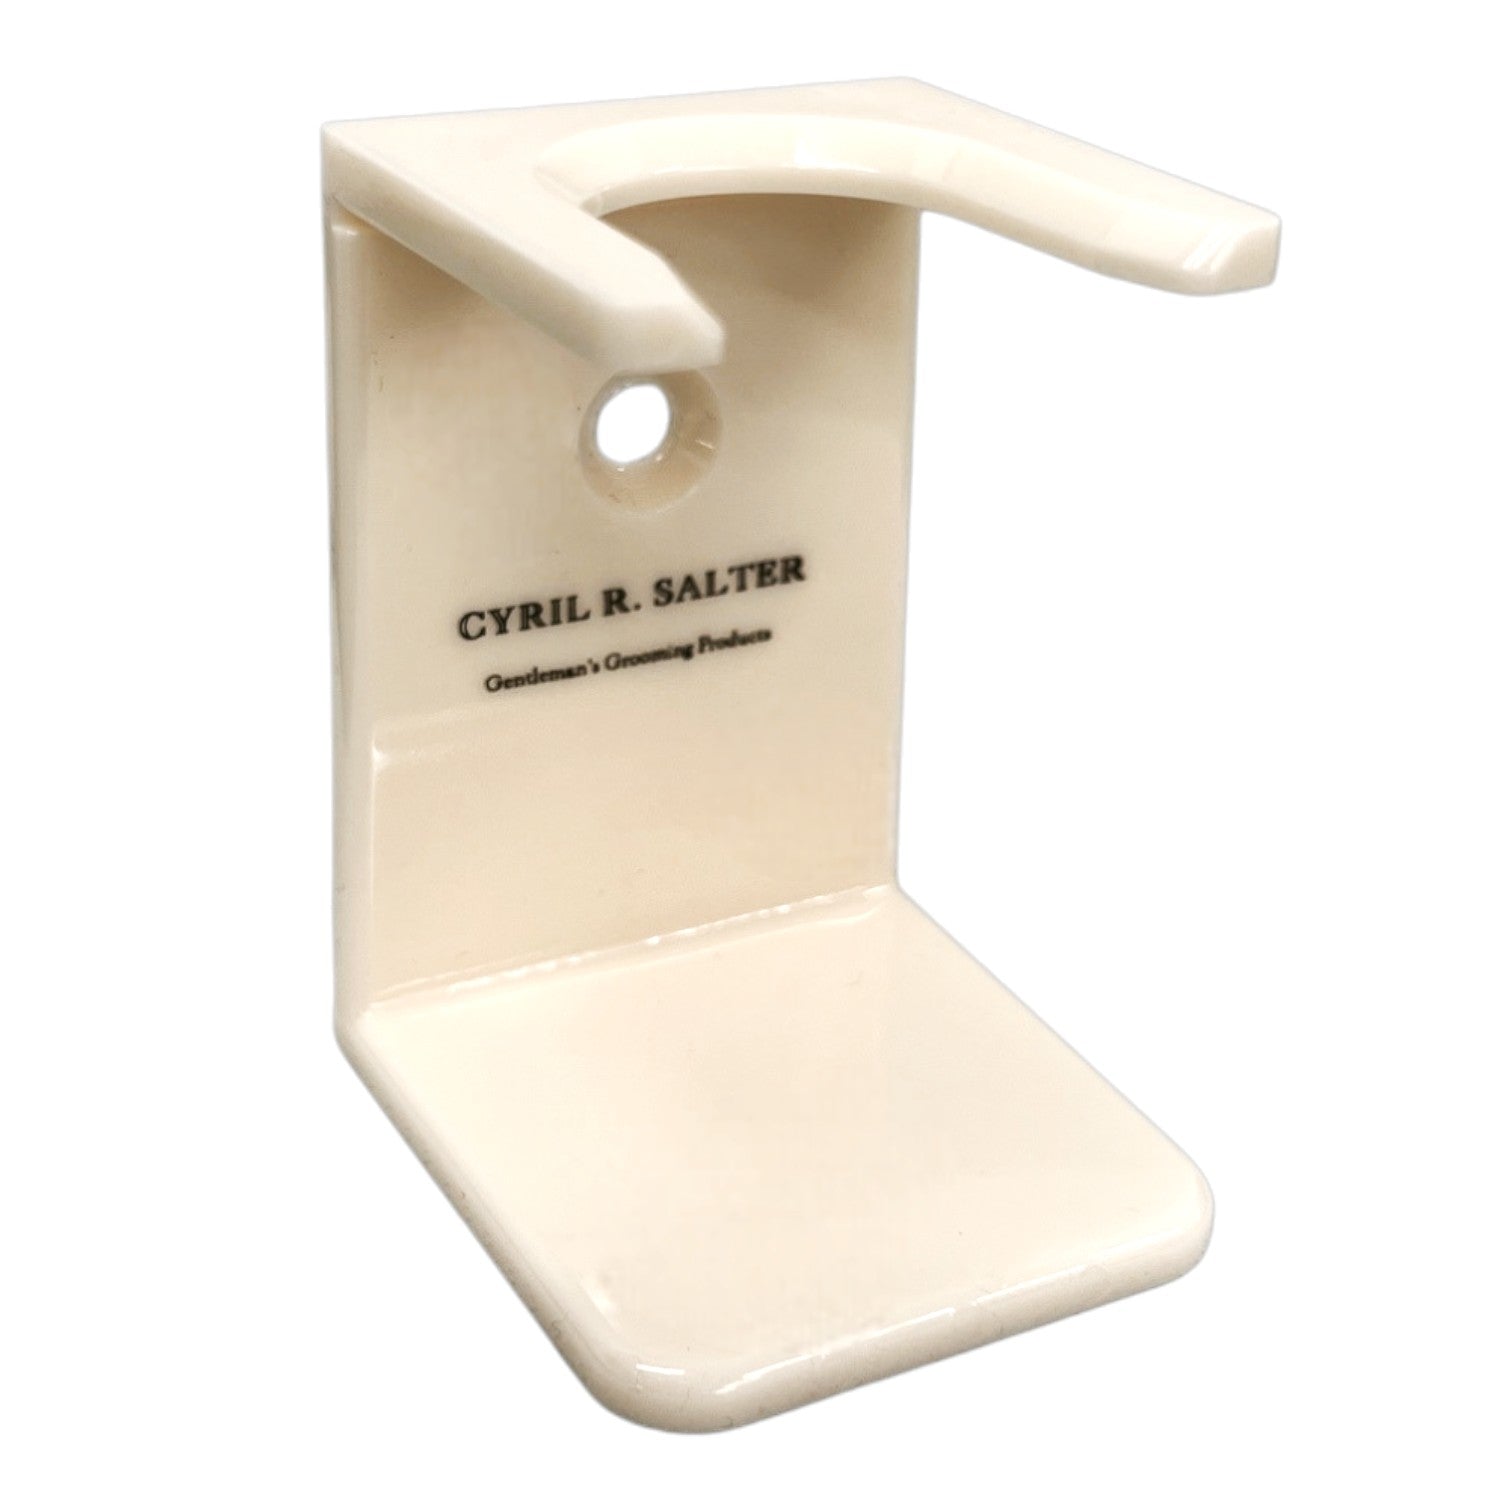 Cyril R. Salter Faux Ivory Plastic Drip Stand